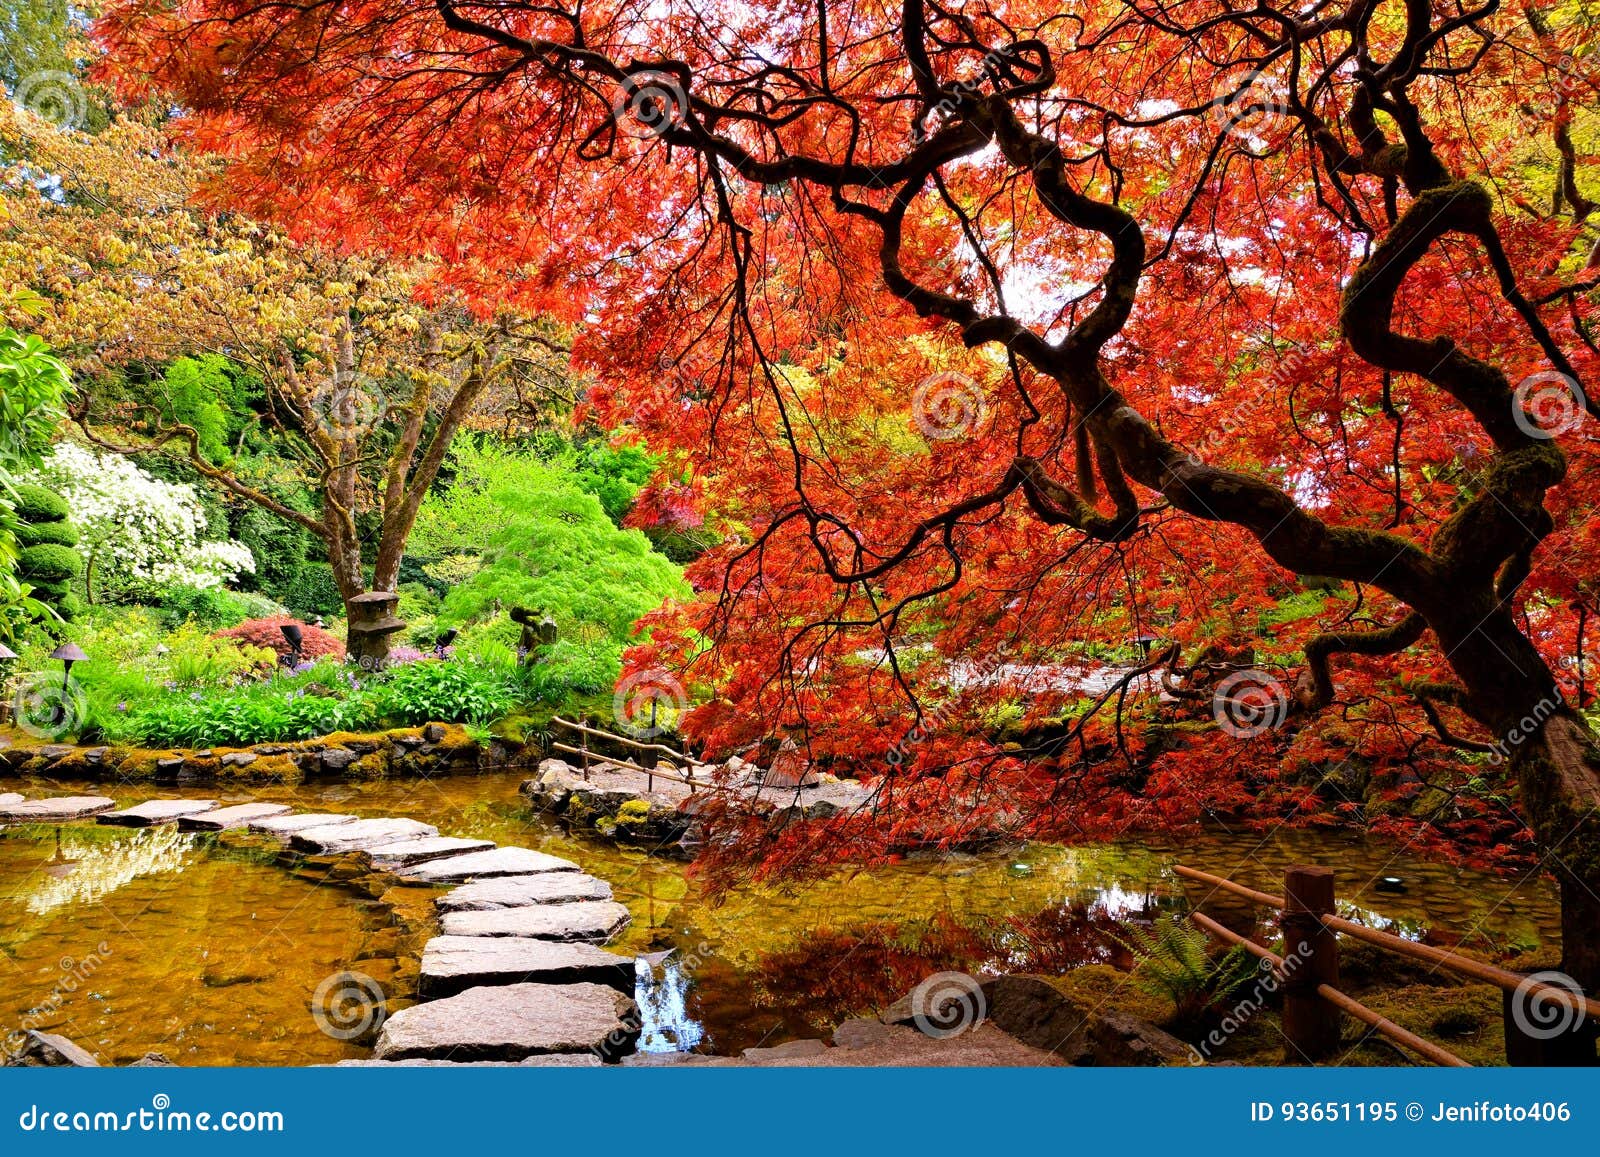 pond with overhanging red japanese maples during springtime